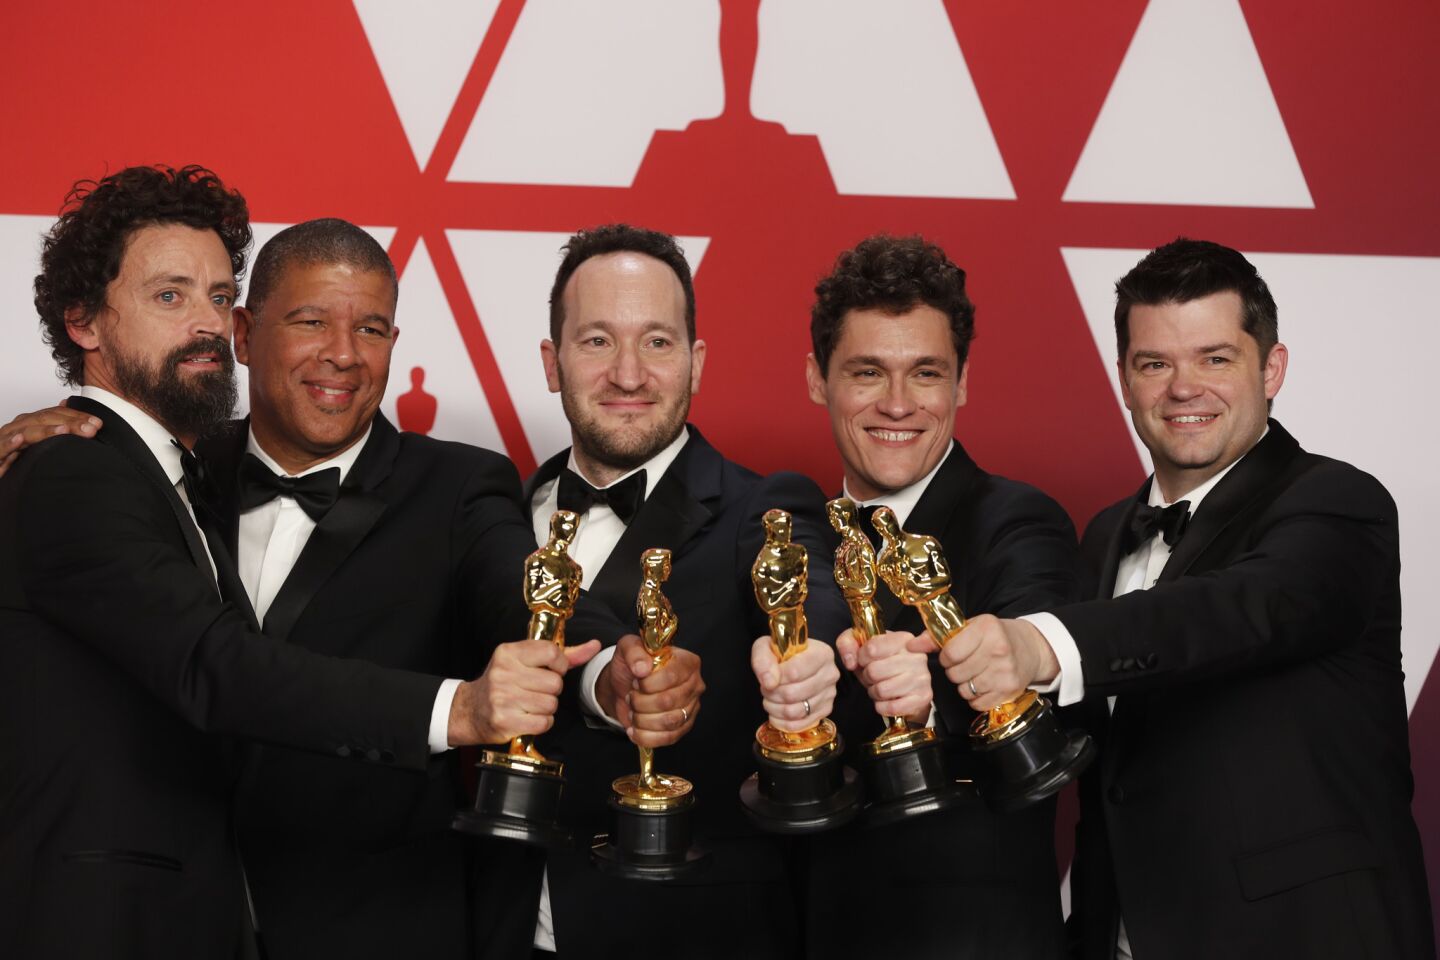 Bob Persichetti, left, Peter Ramsey, Rodney Rothman, Phil Lord and Christopher Miller, winners of the animated feature film award for "Spider-Man: Into the Spider-Verse."